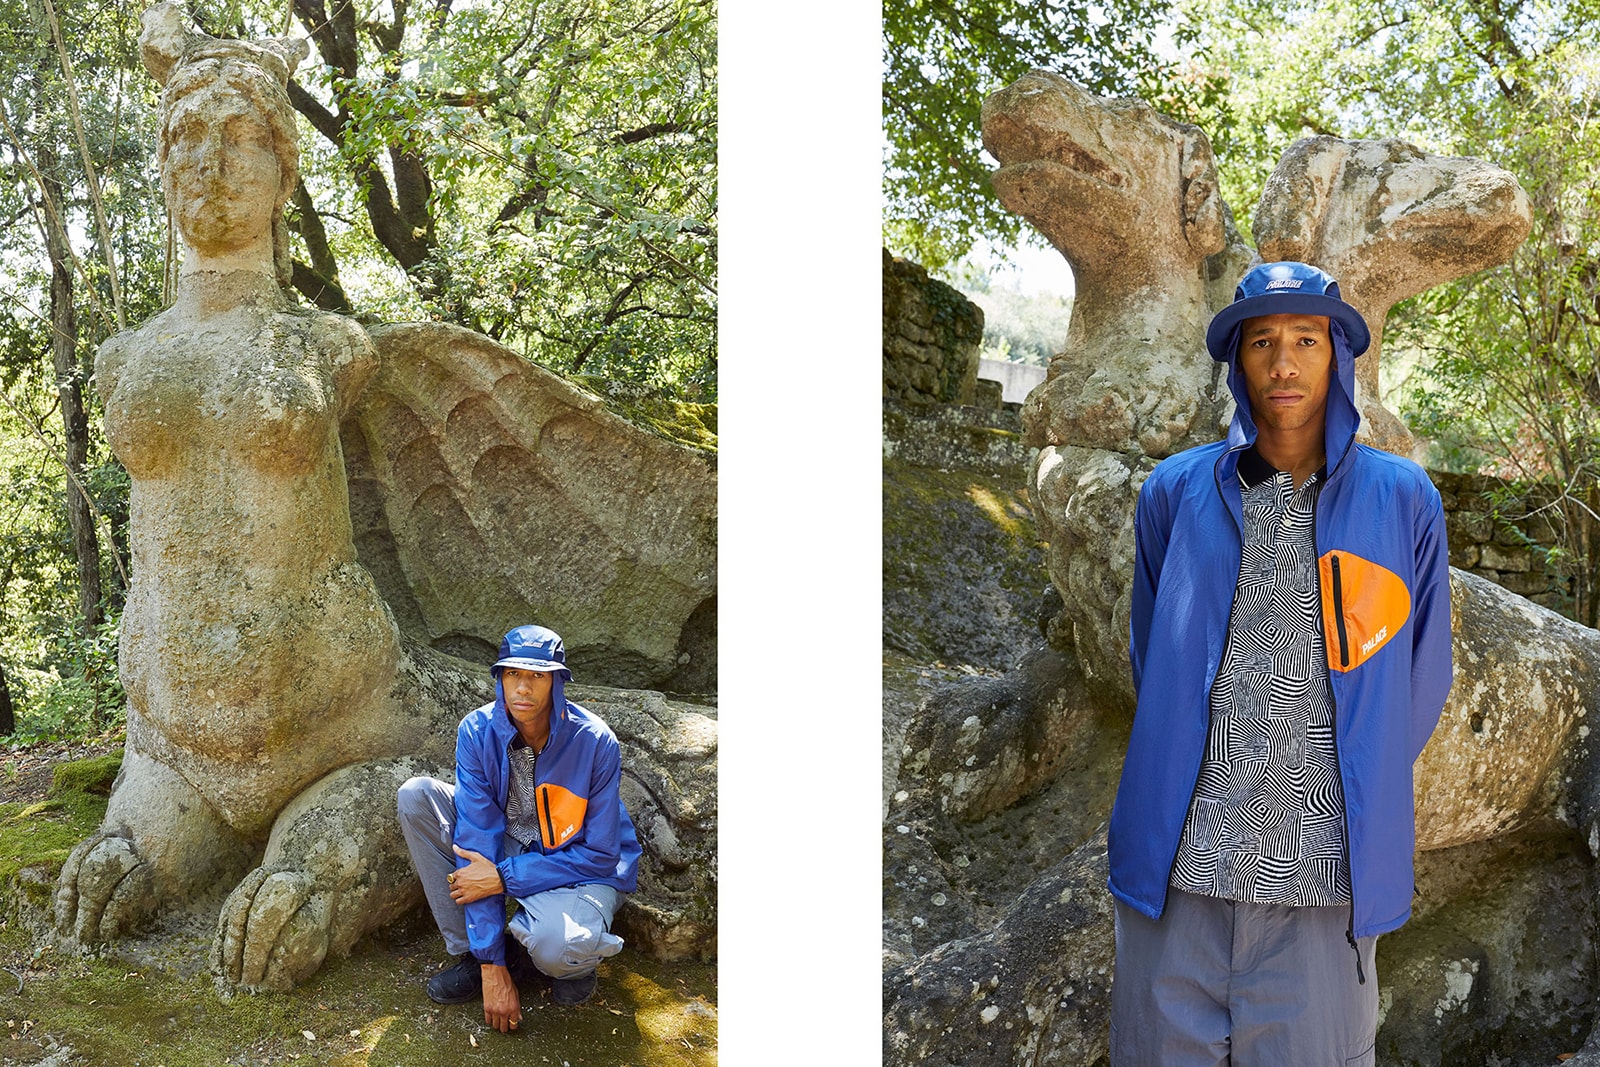 Palace Skateboards Fall Autumn 2018 Juergen Teller Lookbook Clothing Fashion Collection Blondey McCoy Lucien Clarke Rory Milanes Fergus Purcell Lev Tanju Release Information Details New York Tokyo London online web store shirt jacket hoodie T-shirt graphic print